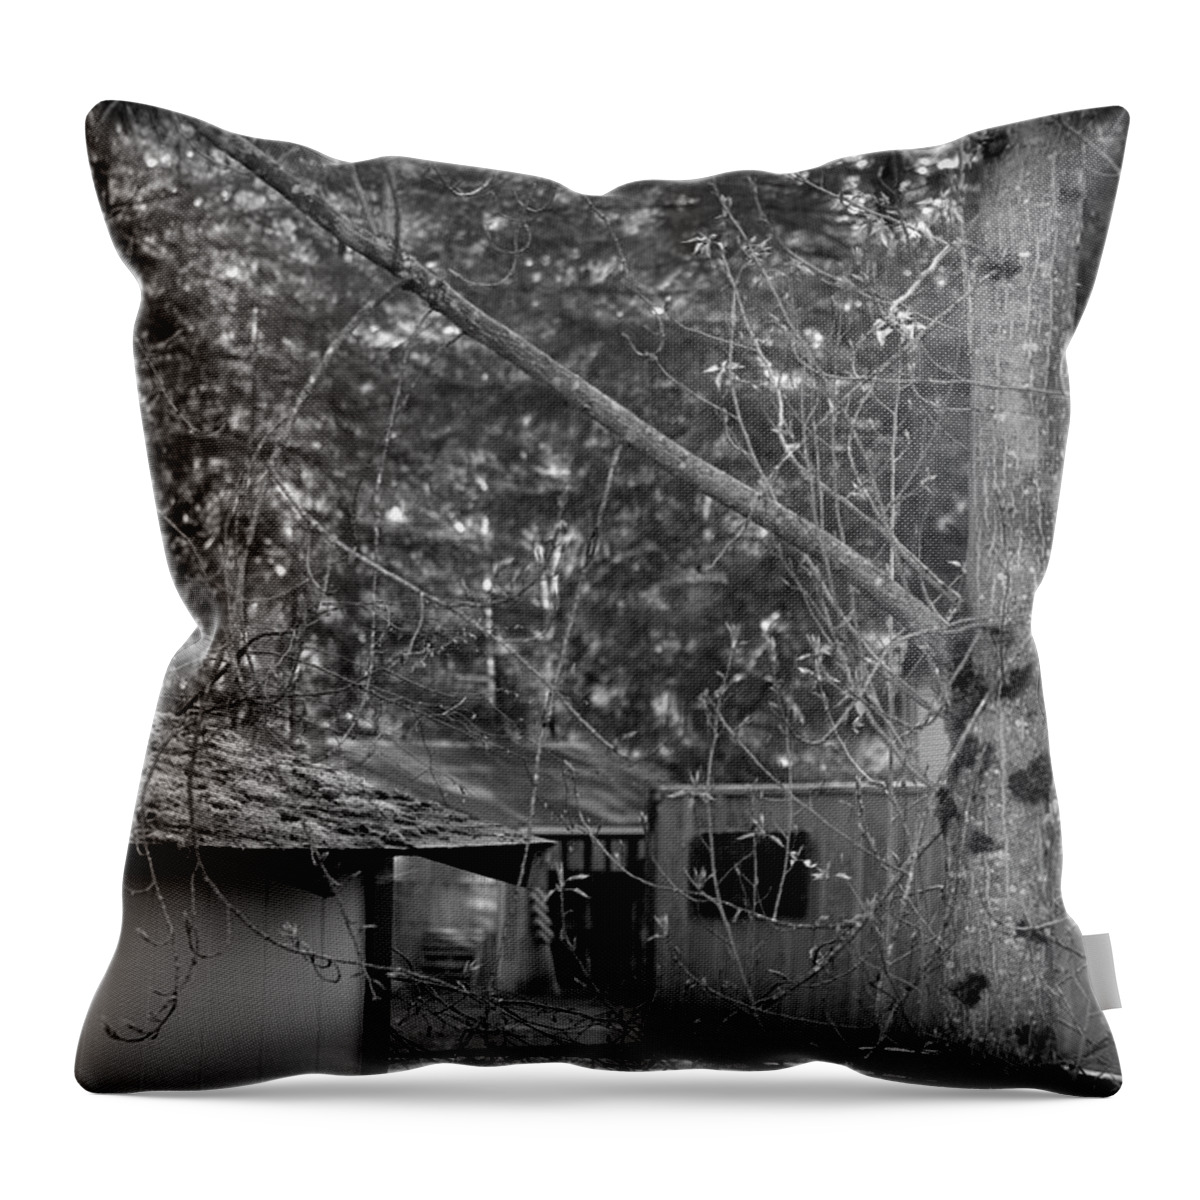 Serenity Throw Pillow featuring the photograph Springtime In Black And White by Jeanette C Landstrom